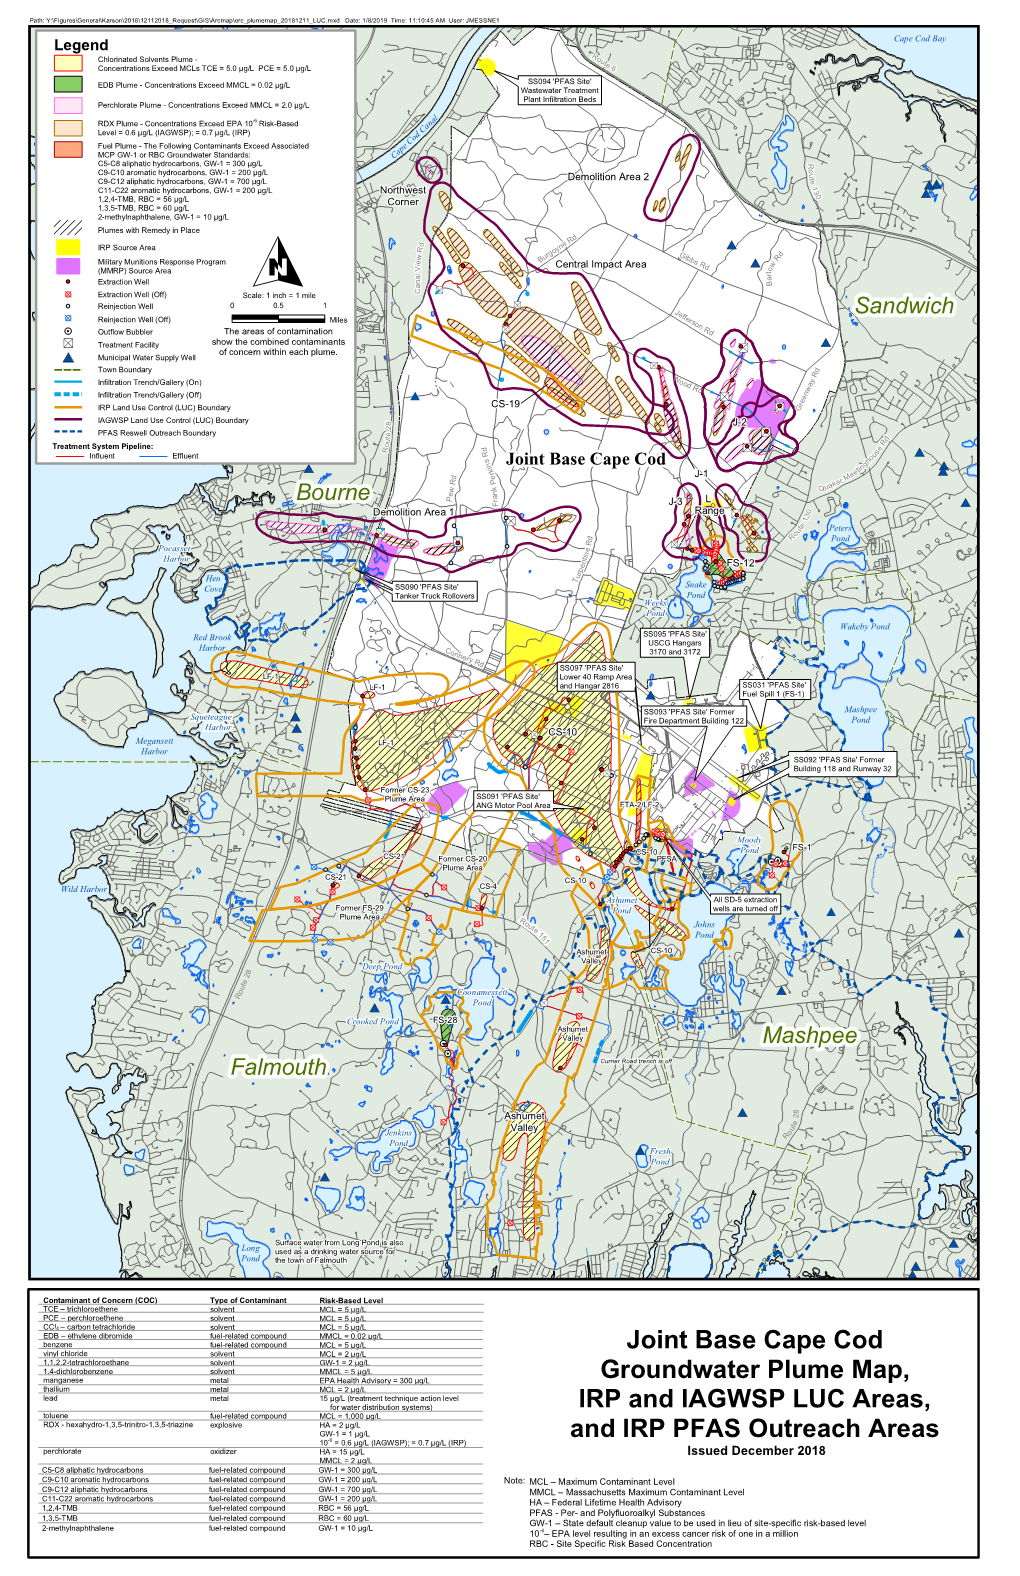 Joint Base Cape Cod Groundwater Plume Map, IRP and IAGWSP LUC